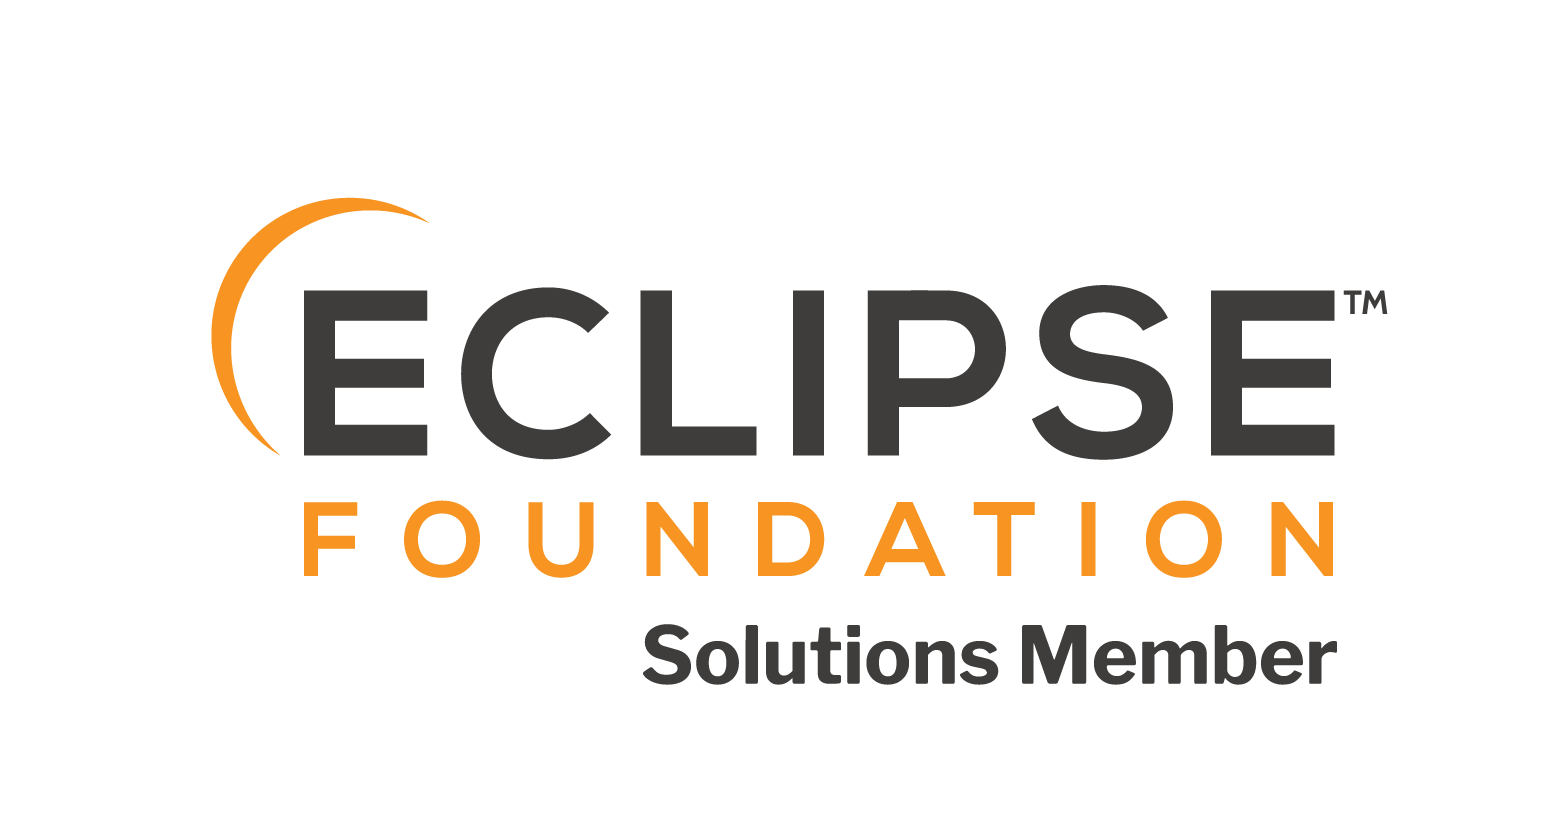 Eclipse Logo - Eclipse Logos and Artwork | The Eclipse Foundation